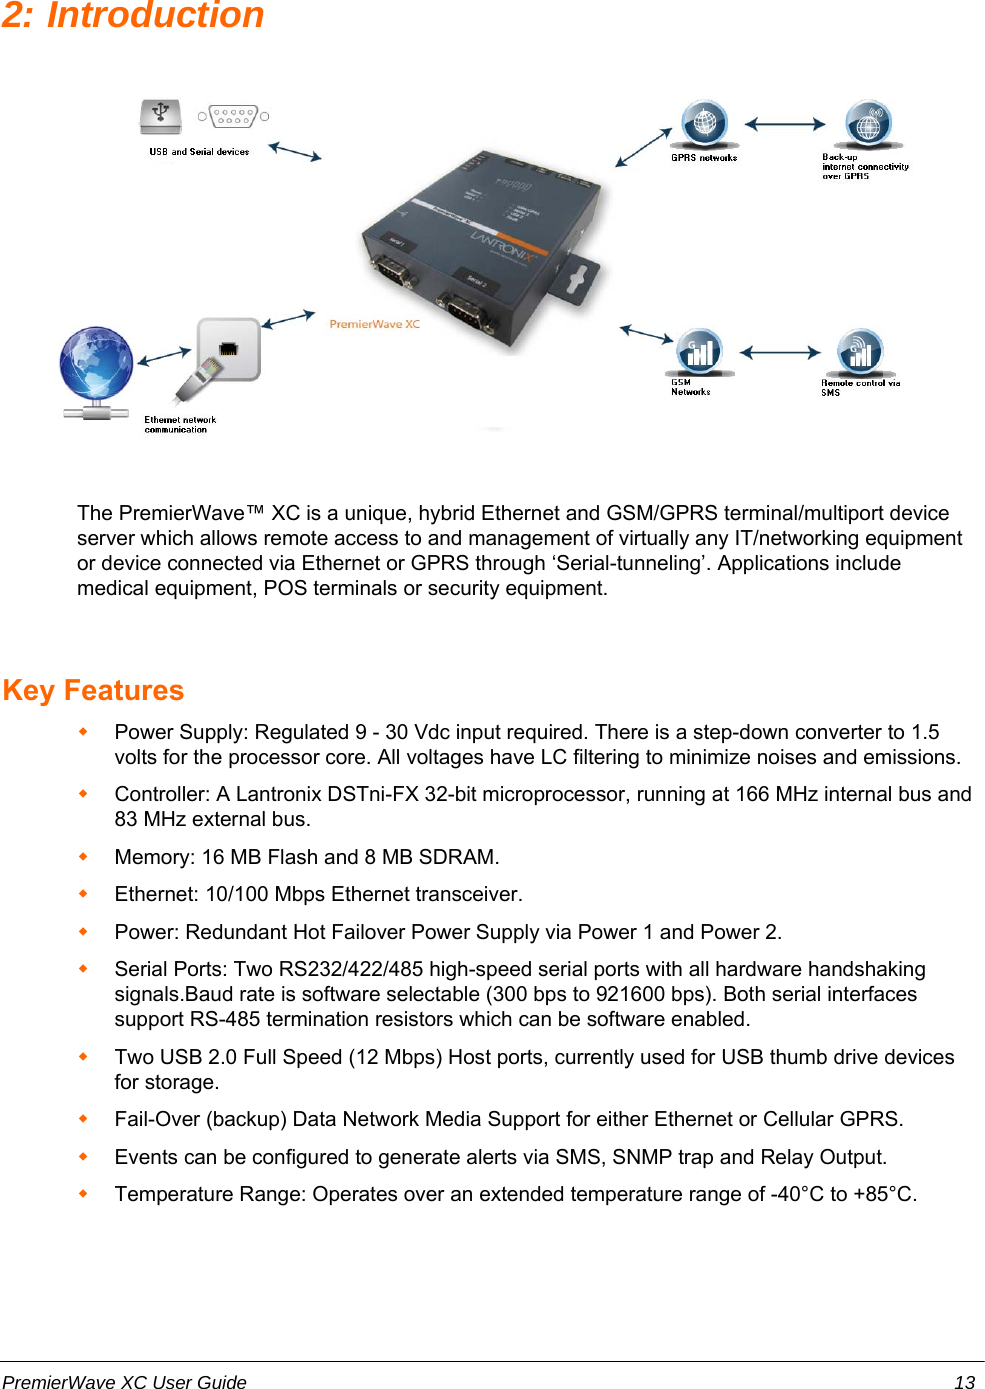 2: IntroductionThe PremierWave™ XC is a unique, hybrid Ethernet and GSM/GPRS terminal/multiport deviceserver which allows remote access to and management of virtually any IT/networking equipmentor device connected via Ethernet or GPRS through ‘Serial-tunneling’. Applications includemedical equipment, POS terminals or security equipment. Key FeaturesPower Supply: Regulated 9 - 30 Vdc input required. There is a step-down converter to 1.5volts for the processor core. All voltages have LC filtering to minimize noises and emissions.Controller: A Lantronix DSTni-FX 32-bit microprocessor, running at 166 MHz internal bus and83 MHz external bus.Memory: 16 MB Flash and 8 MB SDRAM.Ethernet: 10/100 Mbps Ethernet transceiver.Power: Redundant Hot Failover Power Supply via Power 1 and Power 2.Serial Ports: Two RS232/422/485 high-speed serial ports with all hardware handshakingsignals.Baud rate is software selectable (300 bps to 921600 bps). Both serial interfacessupport RS-485 termination resistors which can be software enabled.Two USB 2.0 Full Speed (12 Mbps) Host ports, currently used for USB thumb drive devicesfor storage.Fail-Over (backup) Data Network Media Support for either Ethernet or Cellular GPRS.Events can be configured to generate alerts via SMS, SNMP trap and Relay Output.Temperature Range: Operates over an extended temperature range of -40°C to +85°C.PremierWave XC User Guide 13